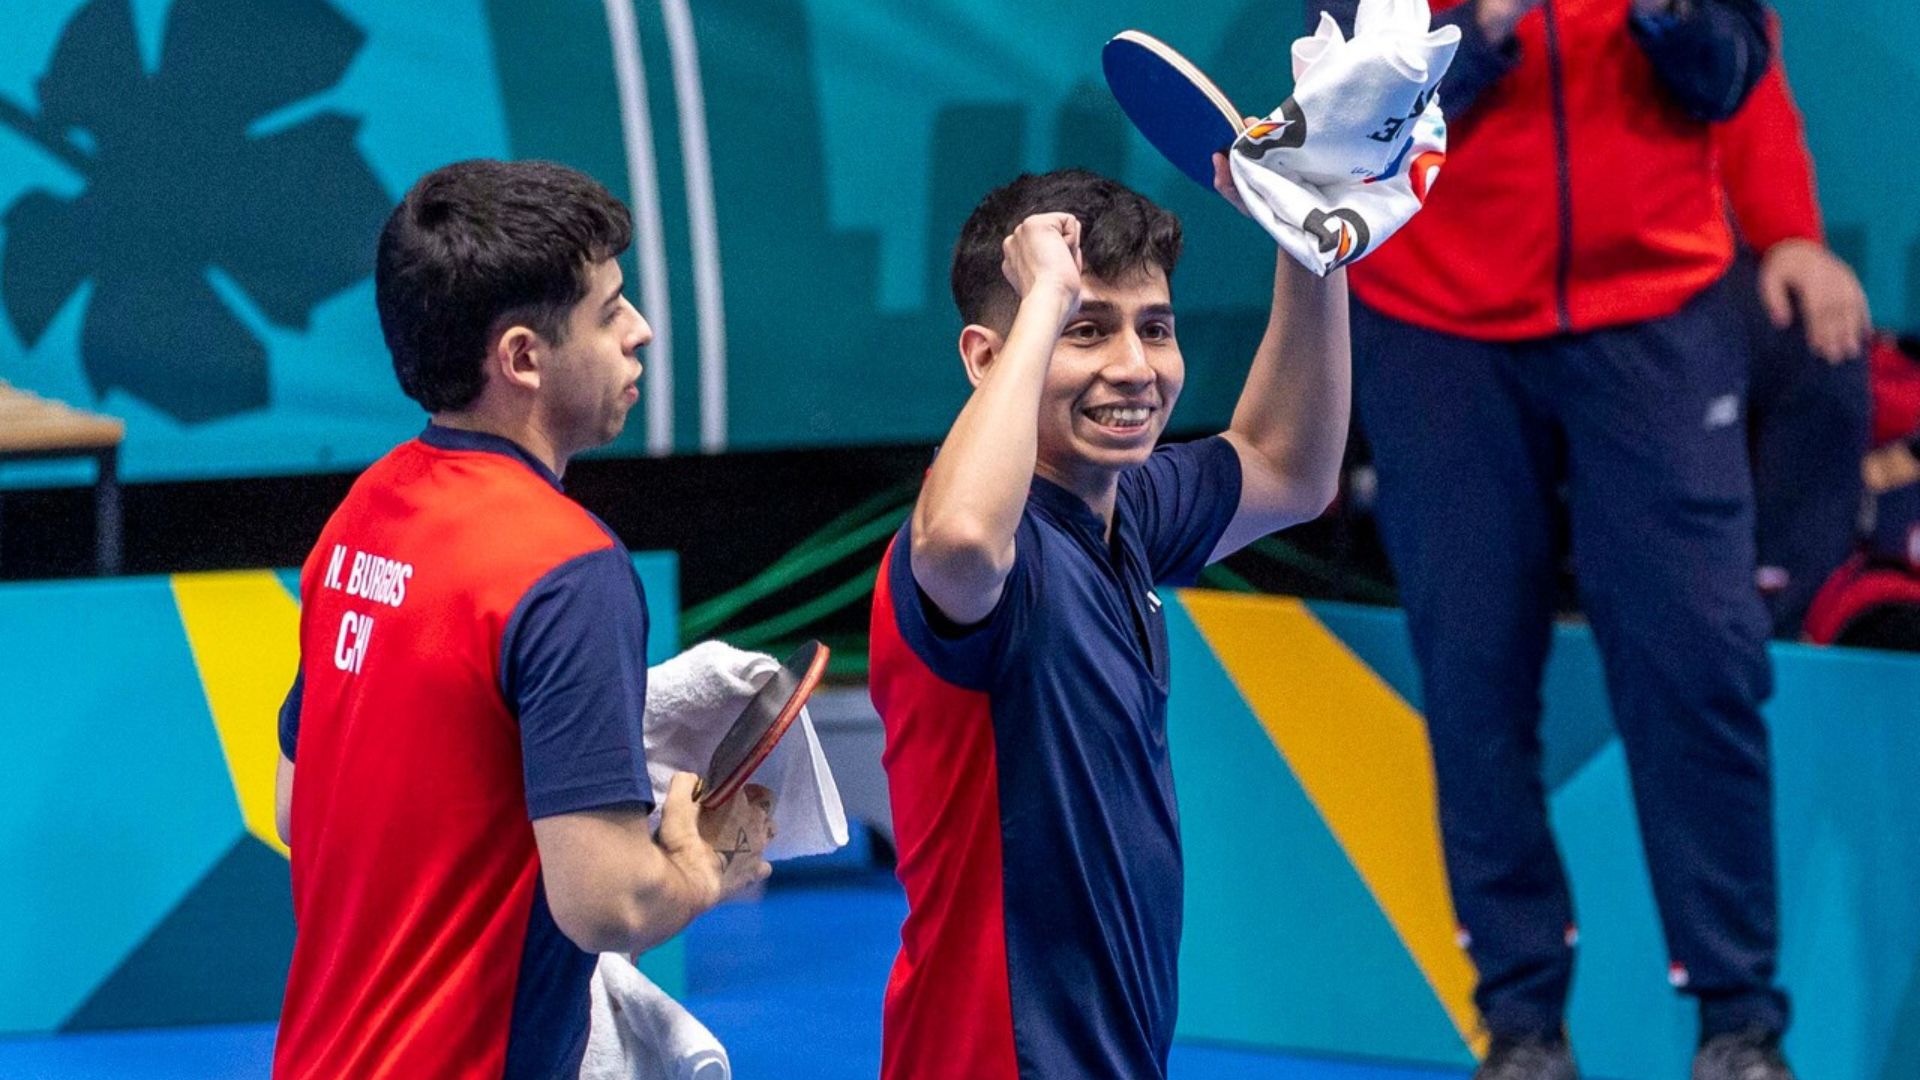 Chile secures three medals in Table Tennis